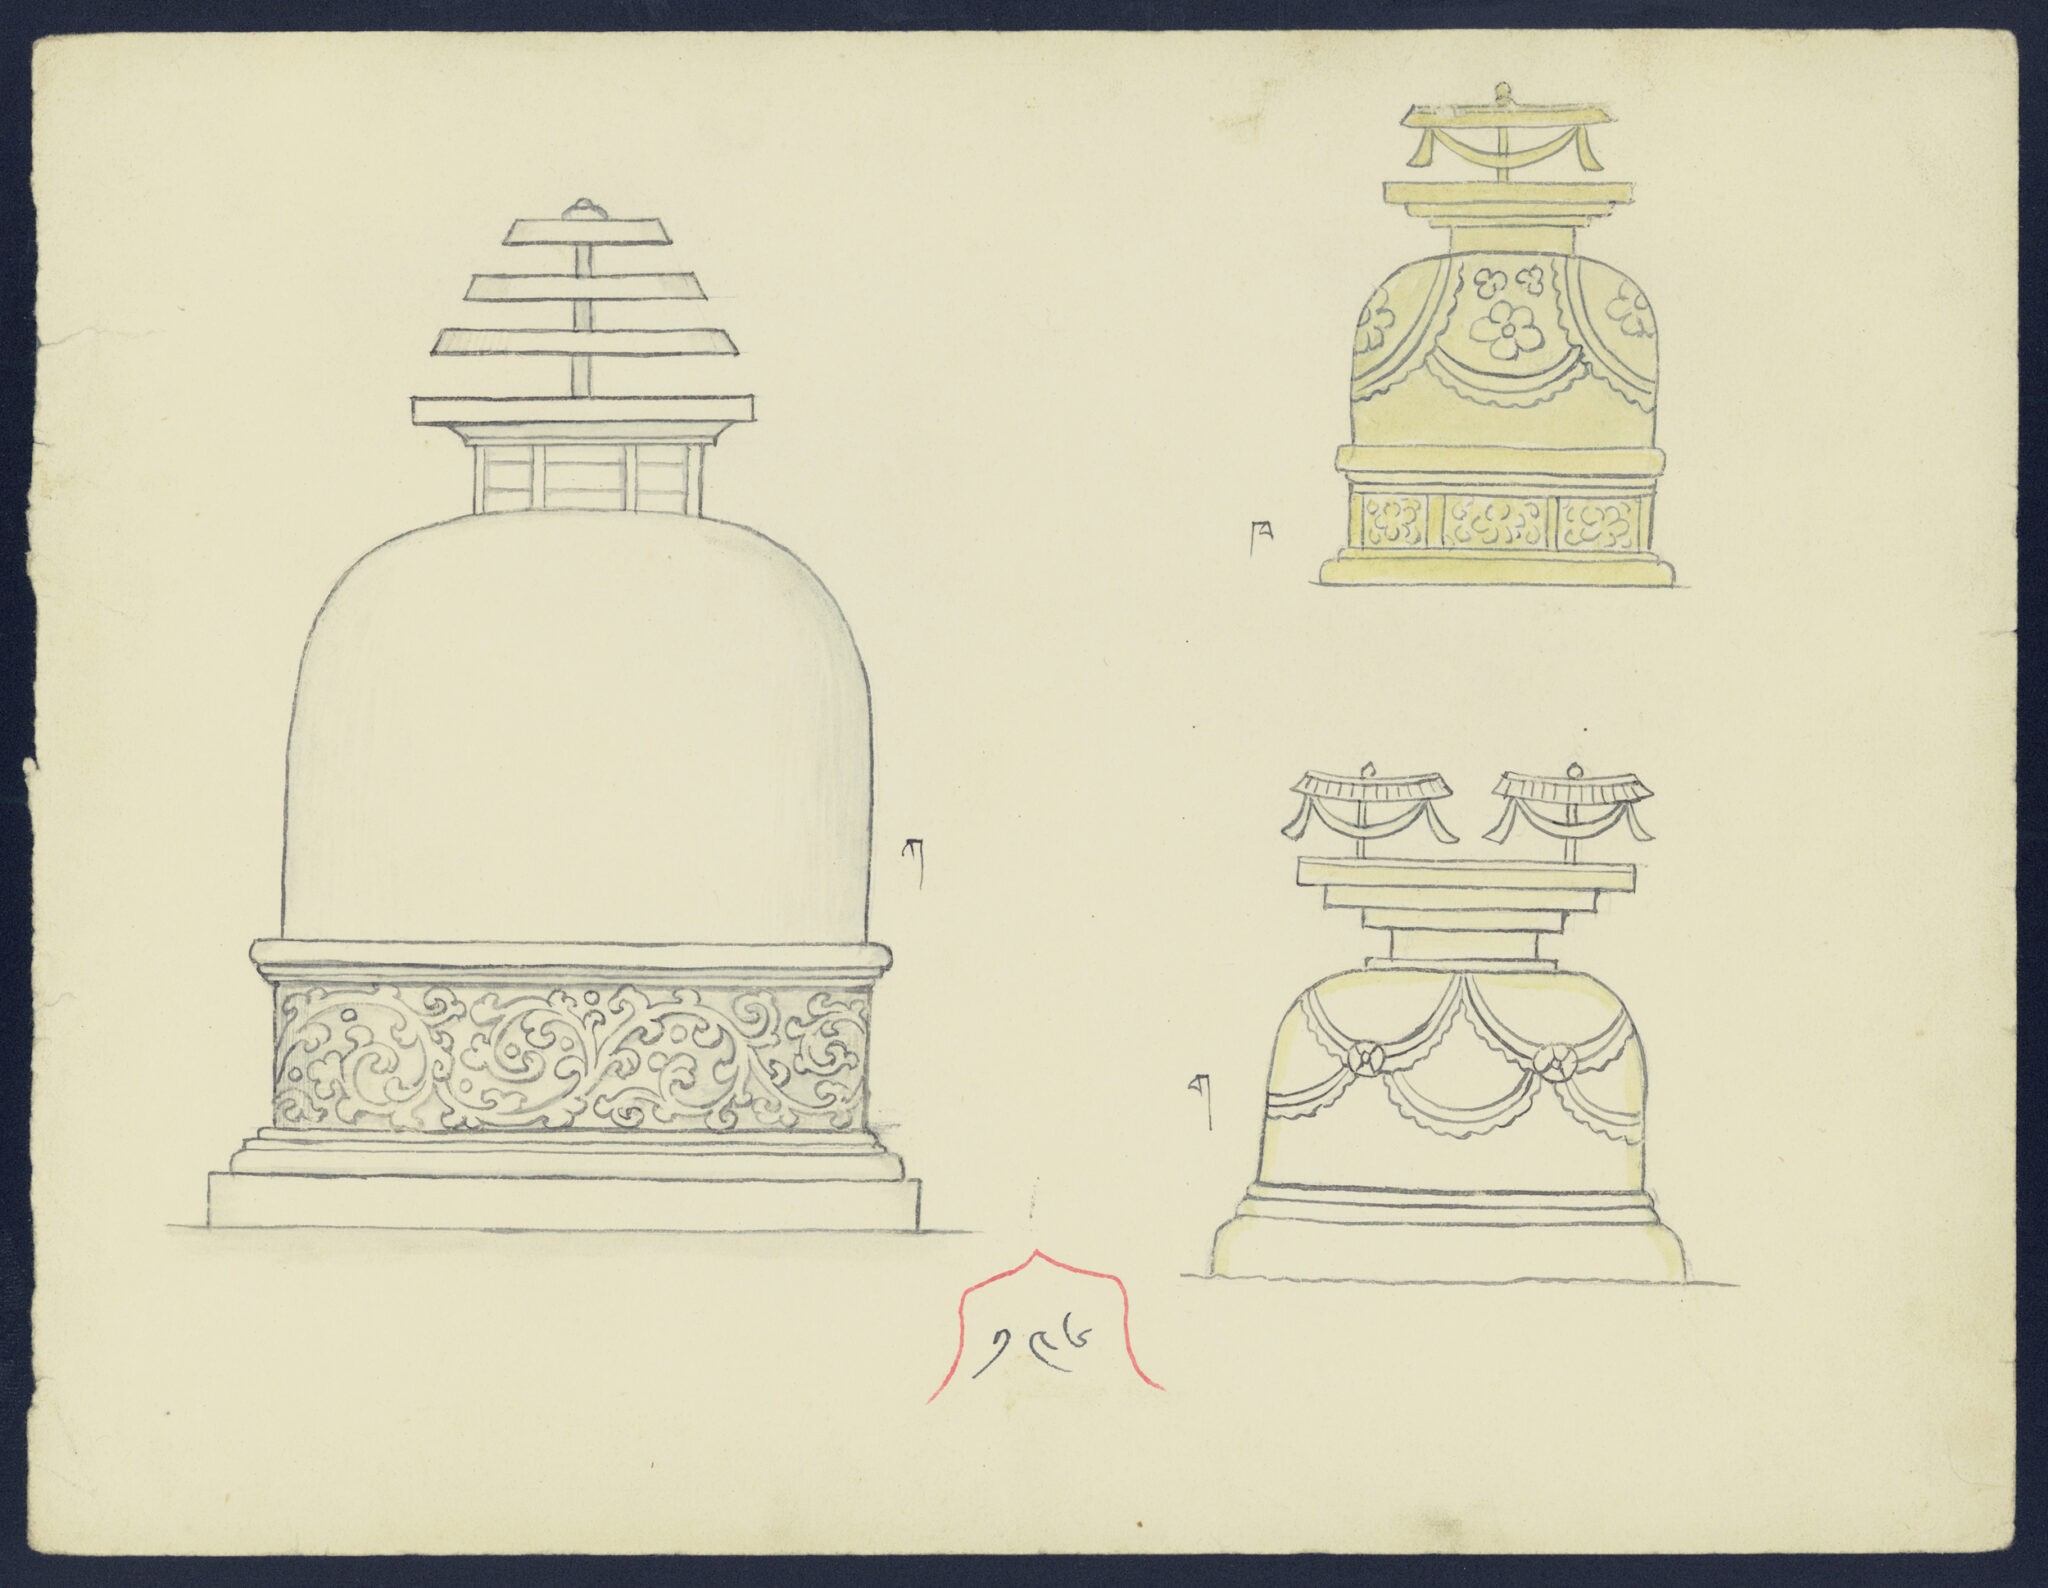 Ink drawing depicting three stupas in different forms: One larger stupa at left, two smaller stupas at right